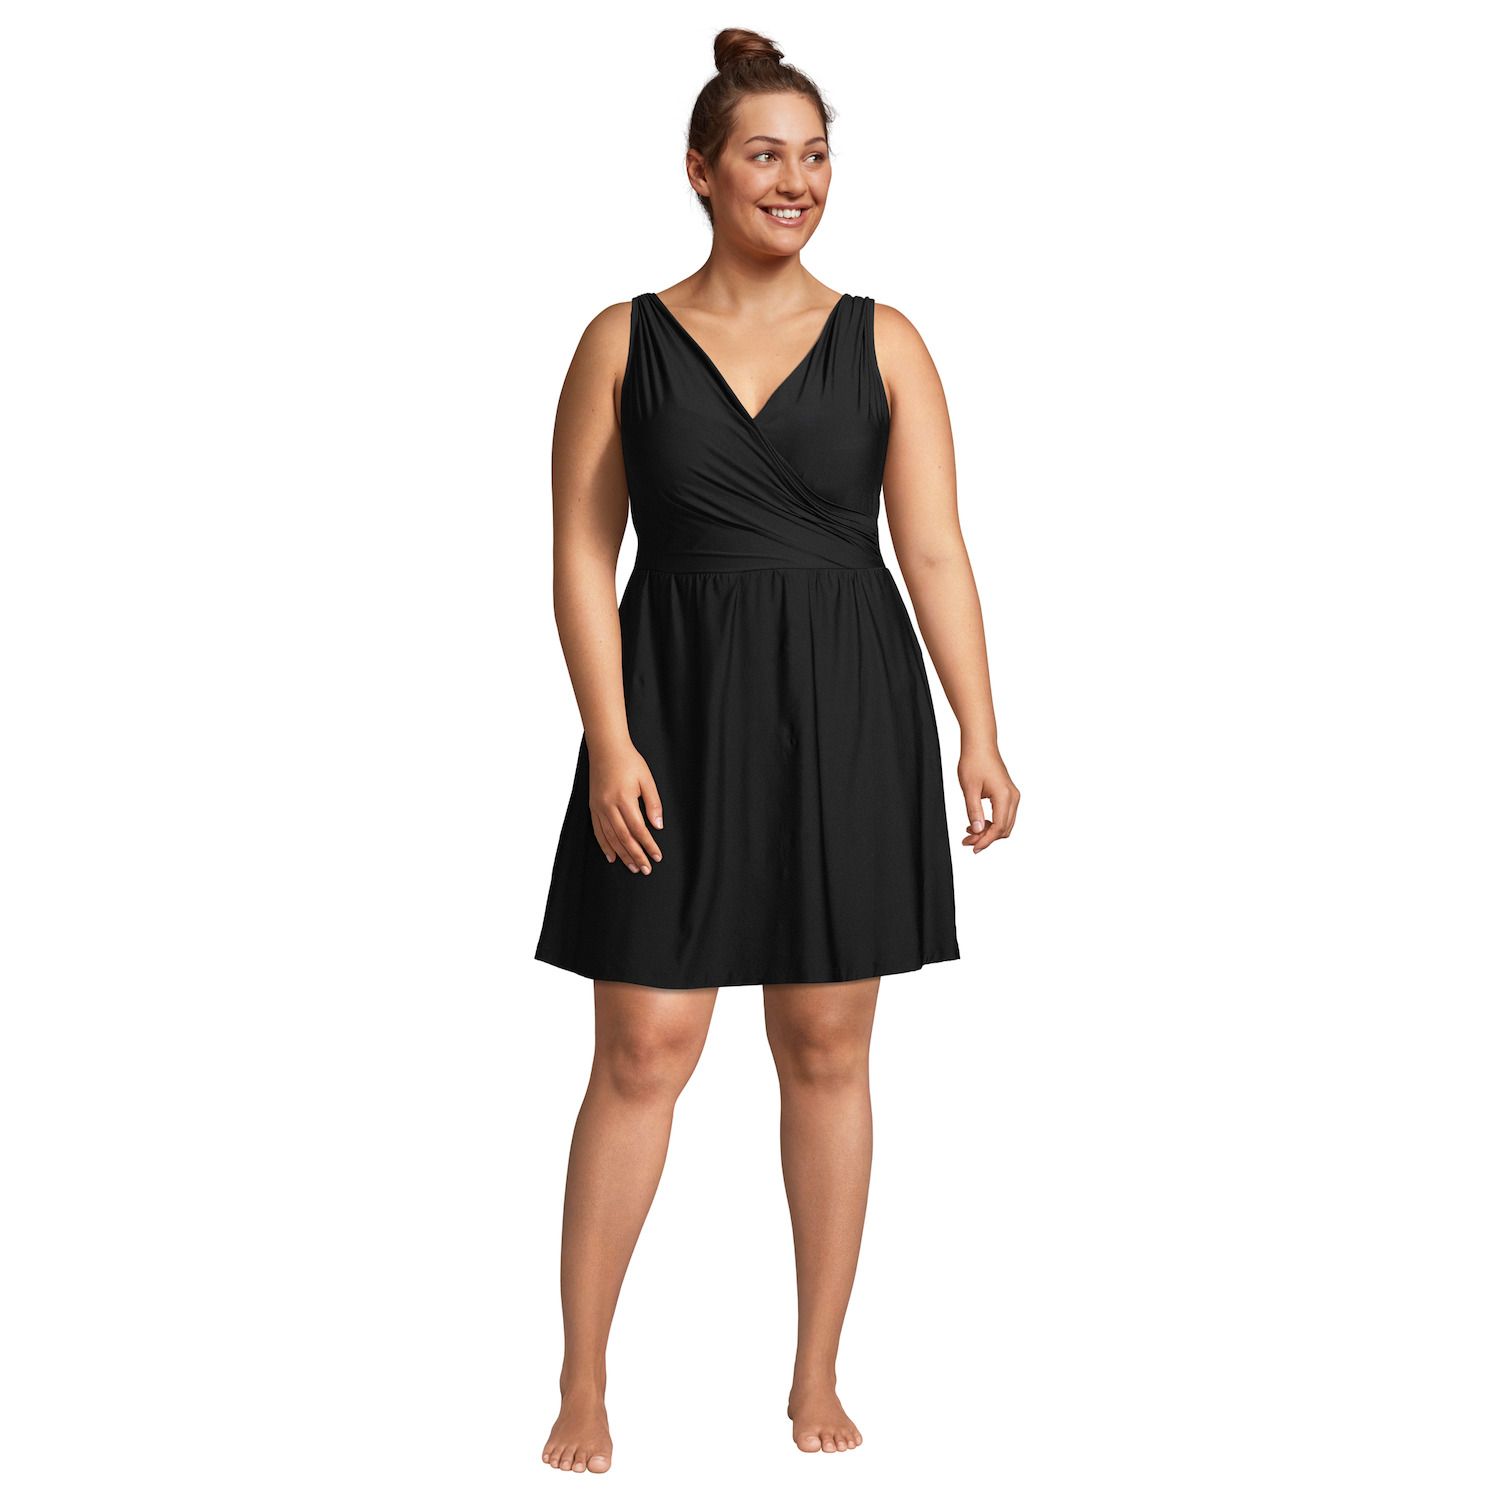 Image for Lands' End Plus Size DD-Cup UPF 50 Tummy Control Surplice One Piece Swimdress at Kohl's.